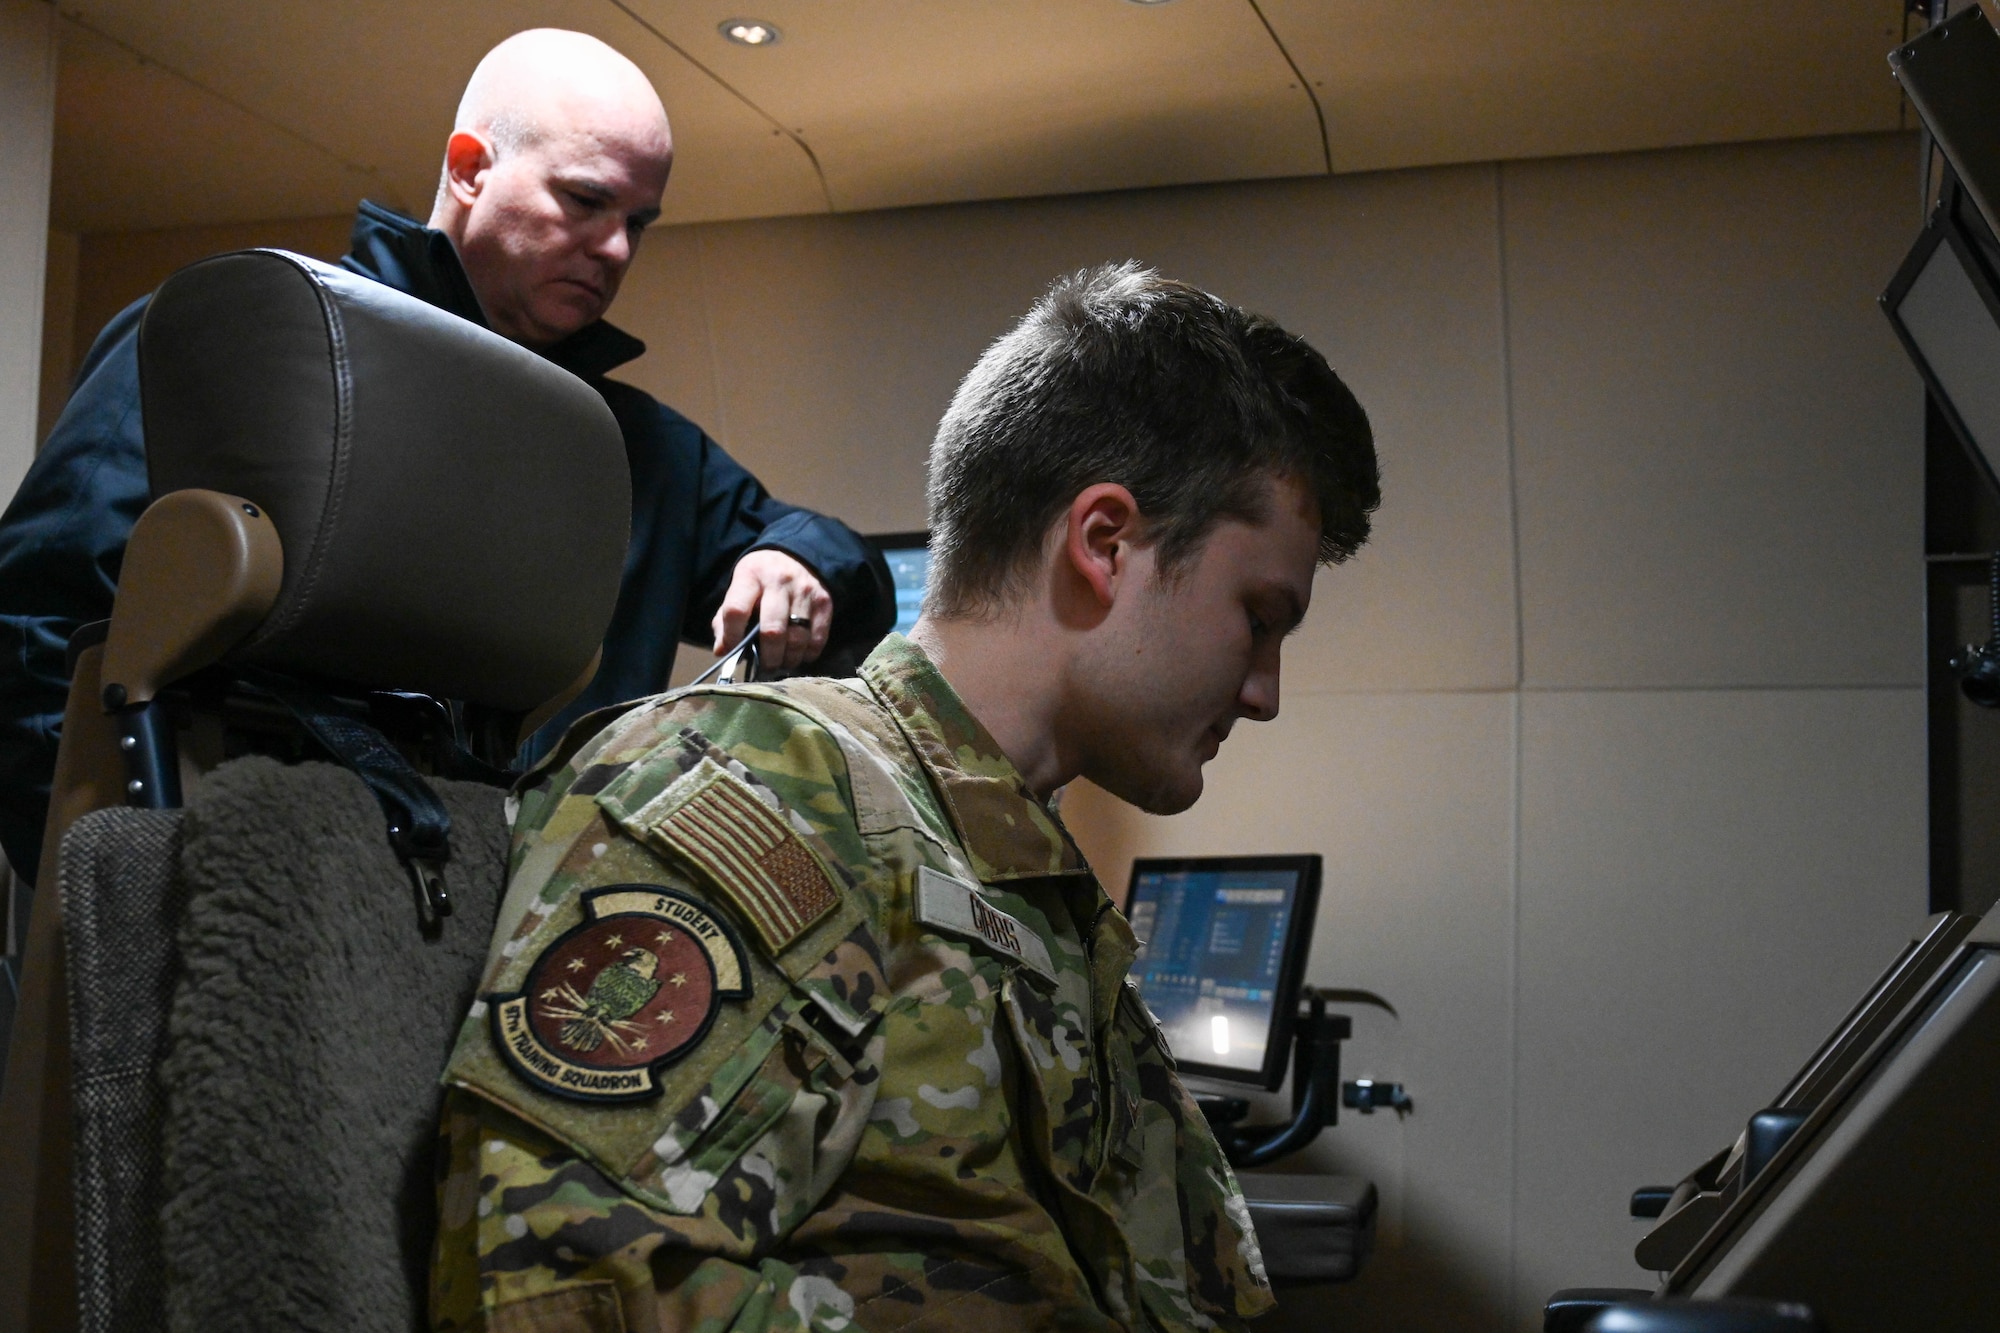 Airman 1st Class Luke Gibbs (right), 97th Training Squadron boom operator student, goes through a preflight checklist in the simulator, while Mike Morris, KC-46 Pegasus boom operator instructor, observes at Altus Air Force Base, Oklahoma, Nov. 29, 2022. The three phases of KC-46 pilot and boom operator training are focused on developing students who know nothing about the KC-46 to eventually operate it. (U.S. Air Force photo by Senior Airman Trenton Jancze)